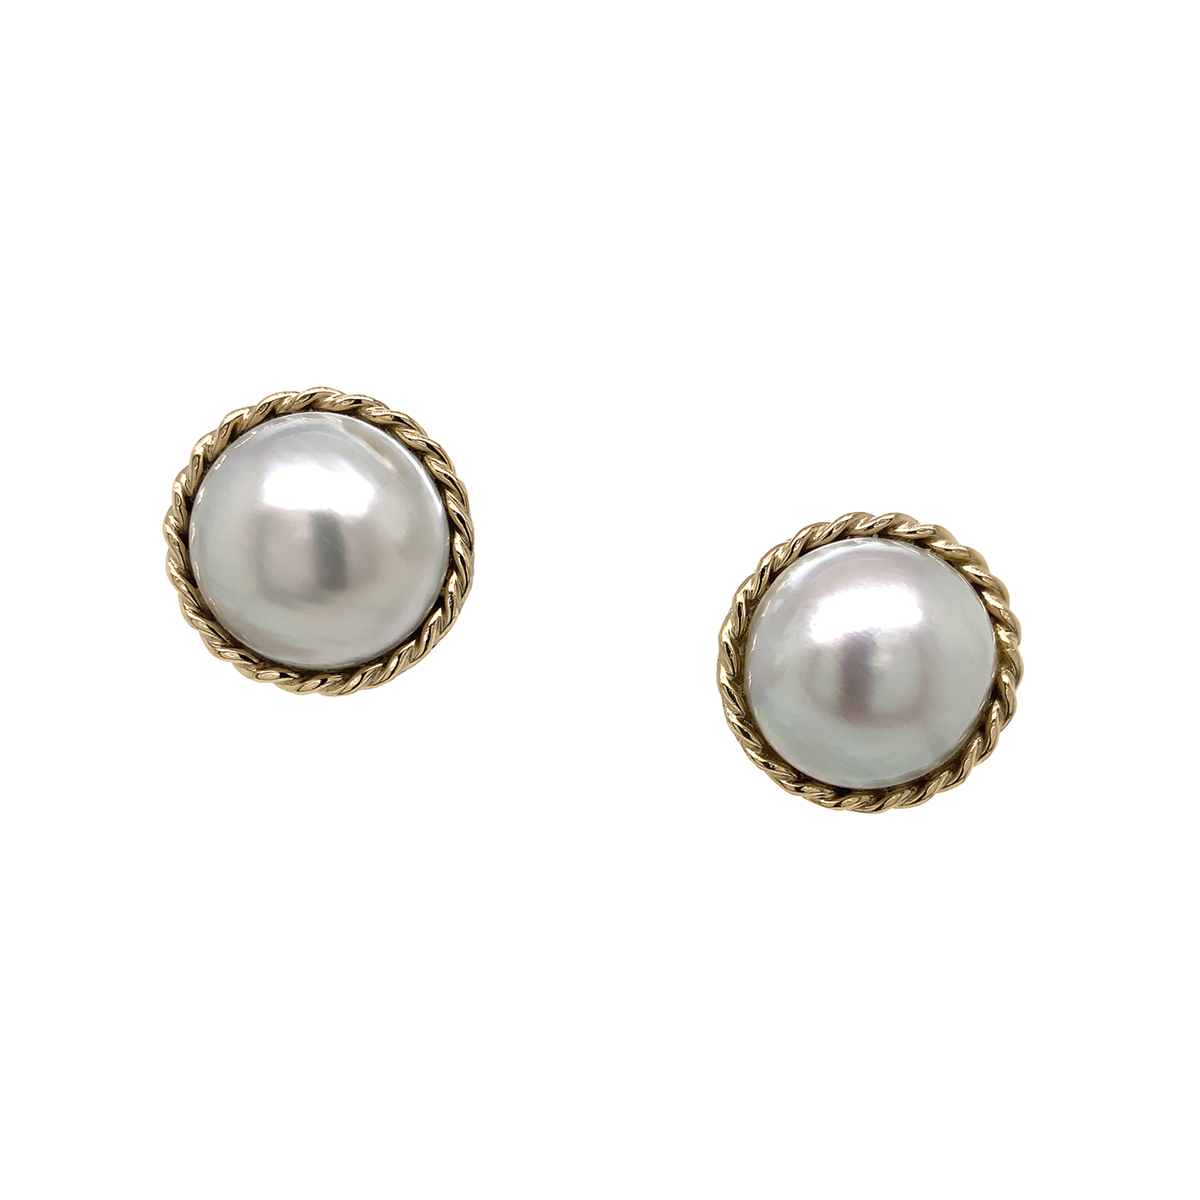 Estate 14k yellow gold "Lindsay" Mabe pearl earrings